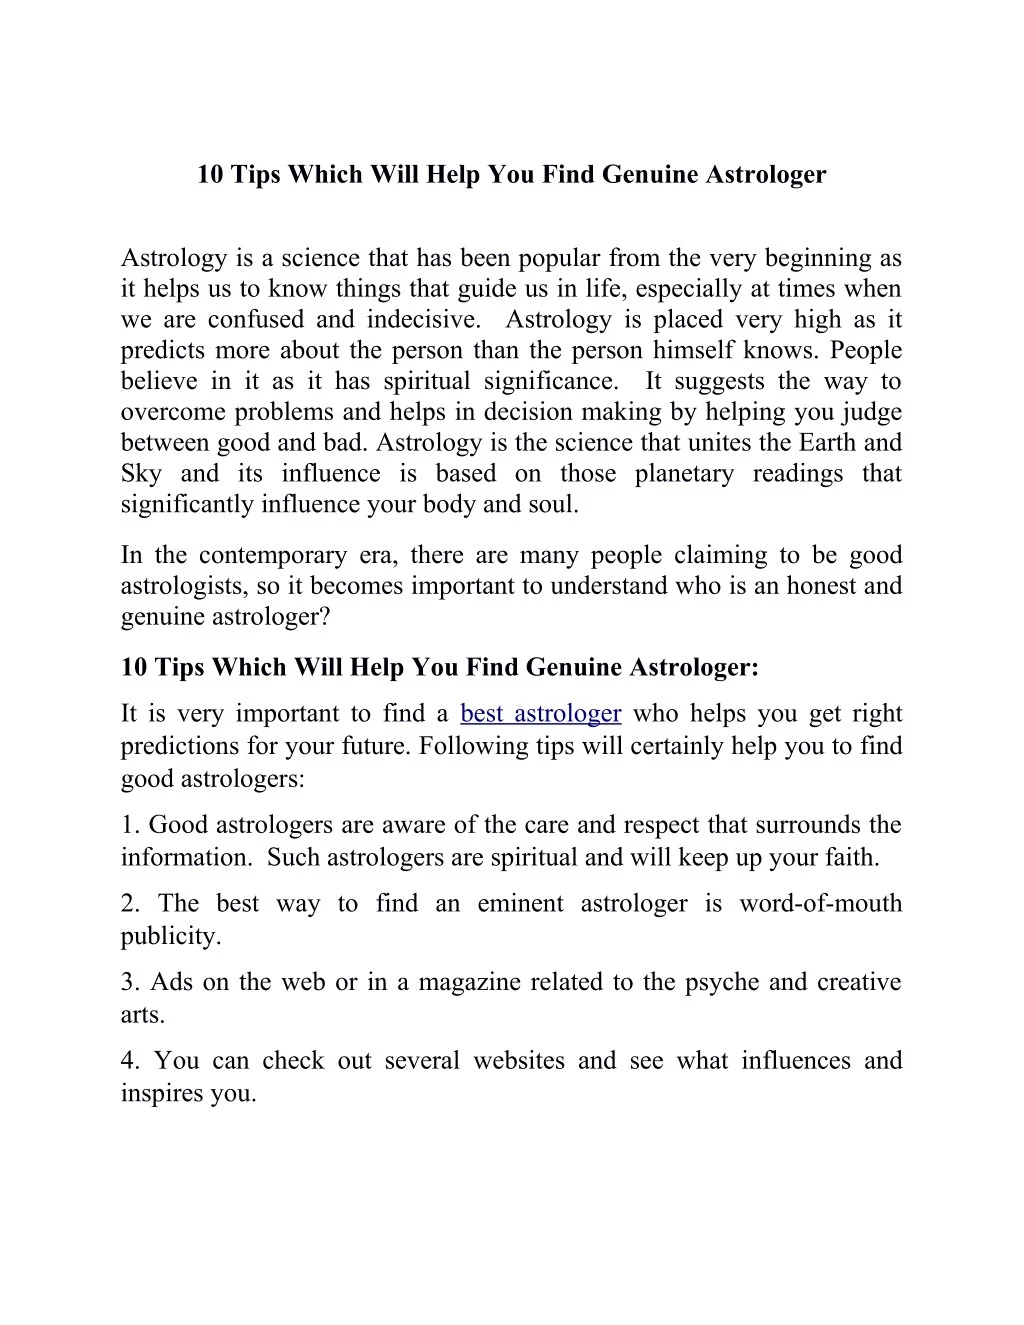 10 tips which will help you find genuine